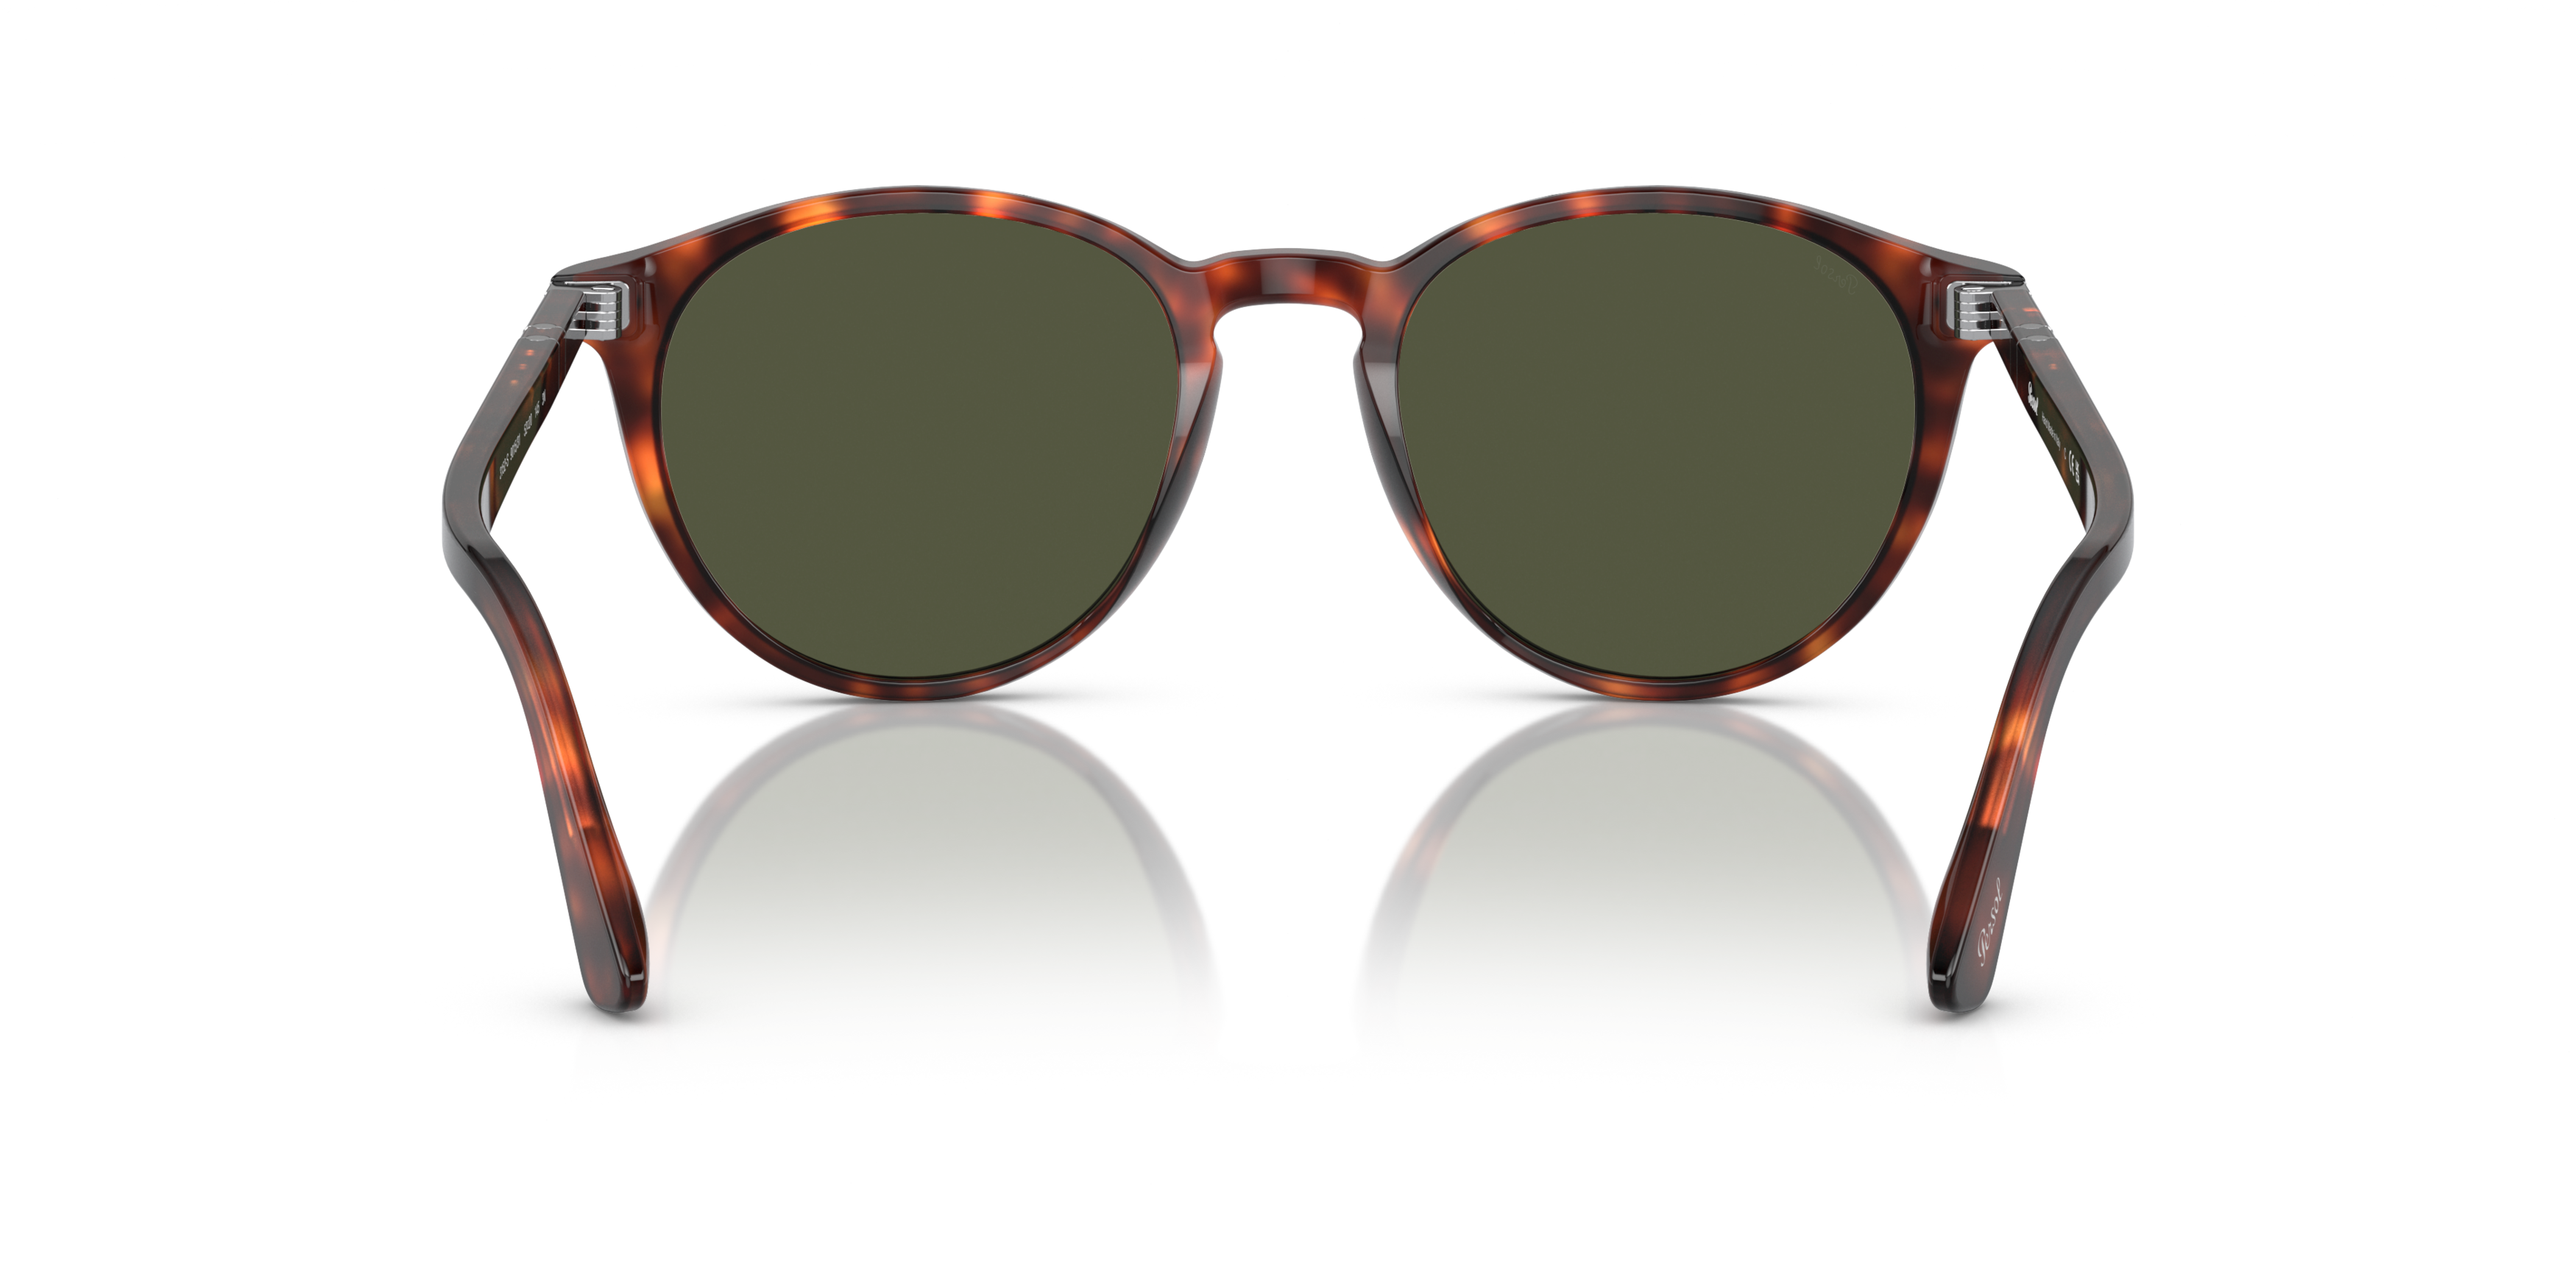 [products.image.detail02] Persol 0PO3152S 901531